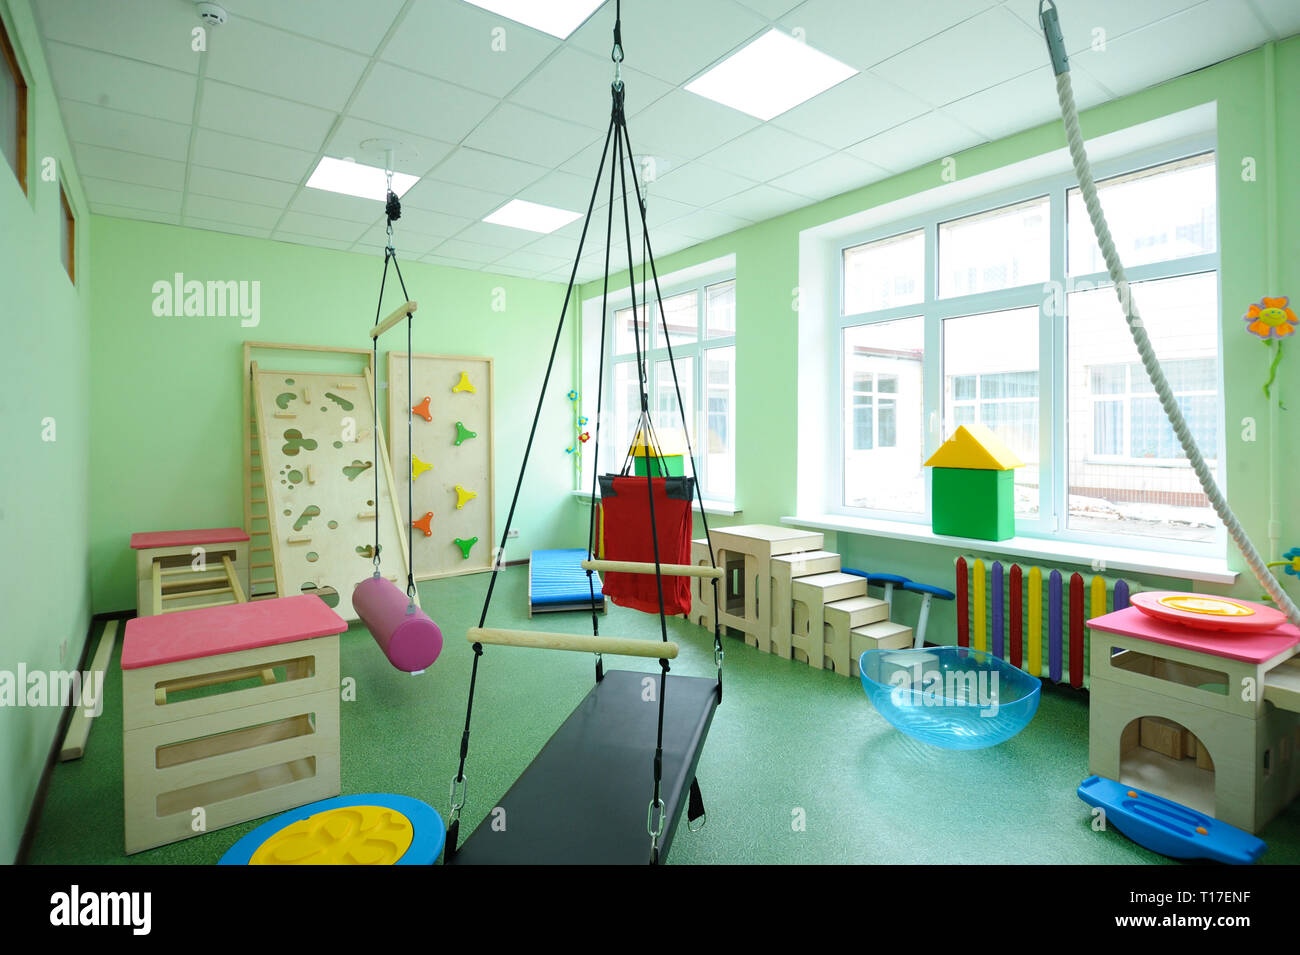 Different physiotherapy equipment in room Stock Photo - Alamy